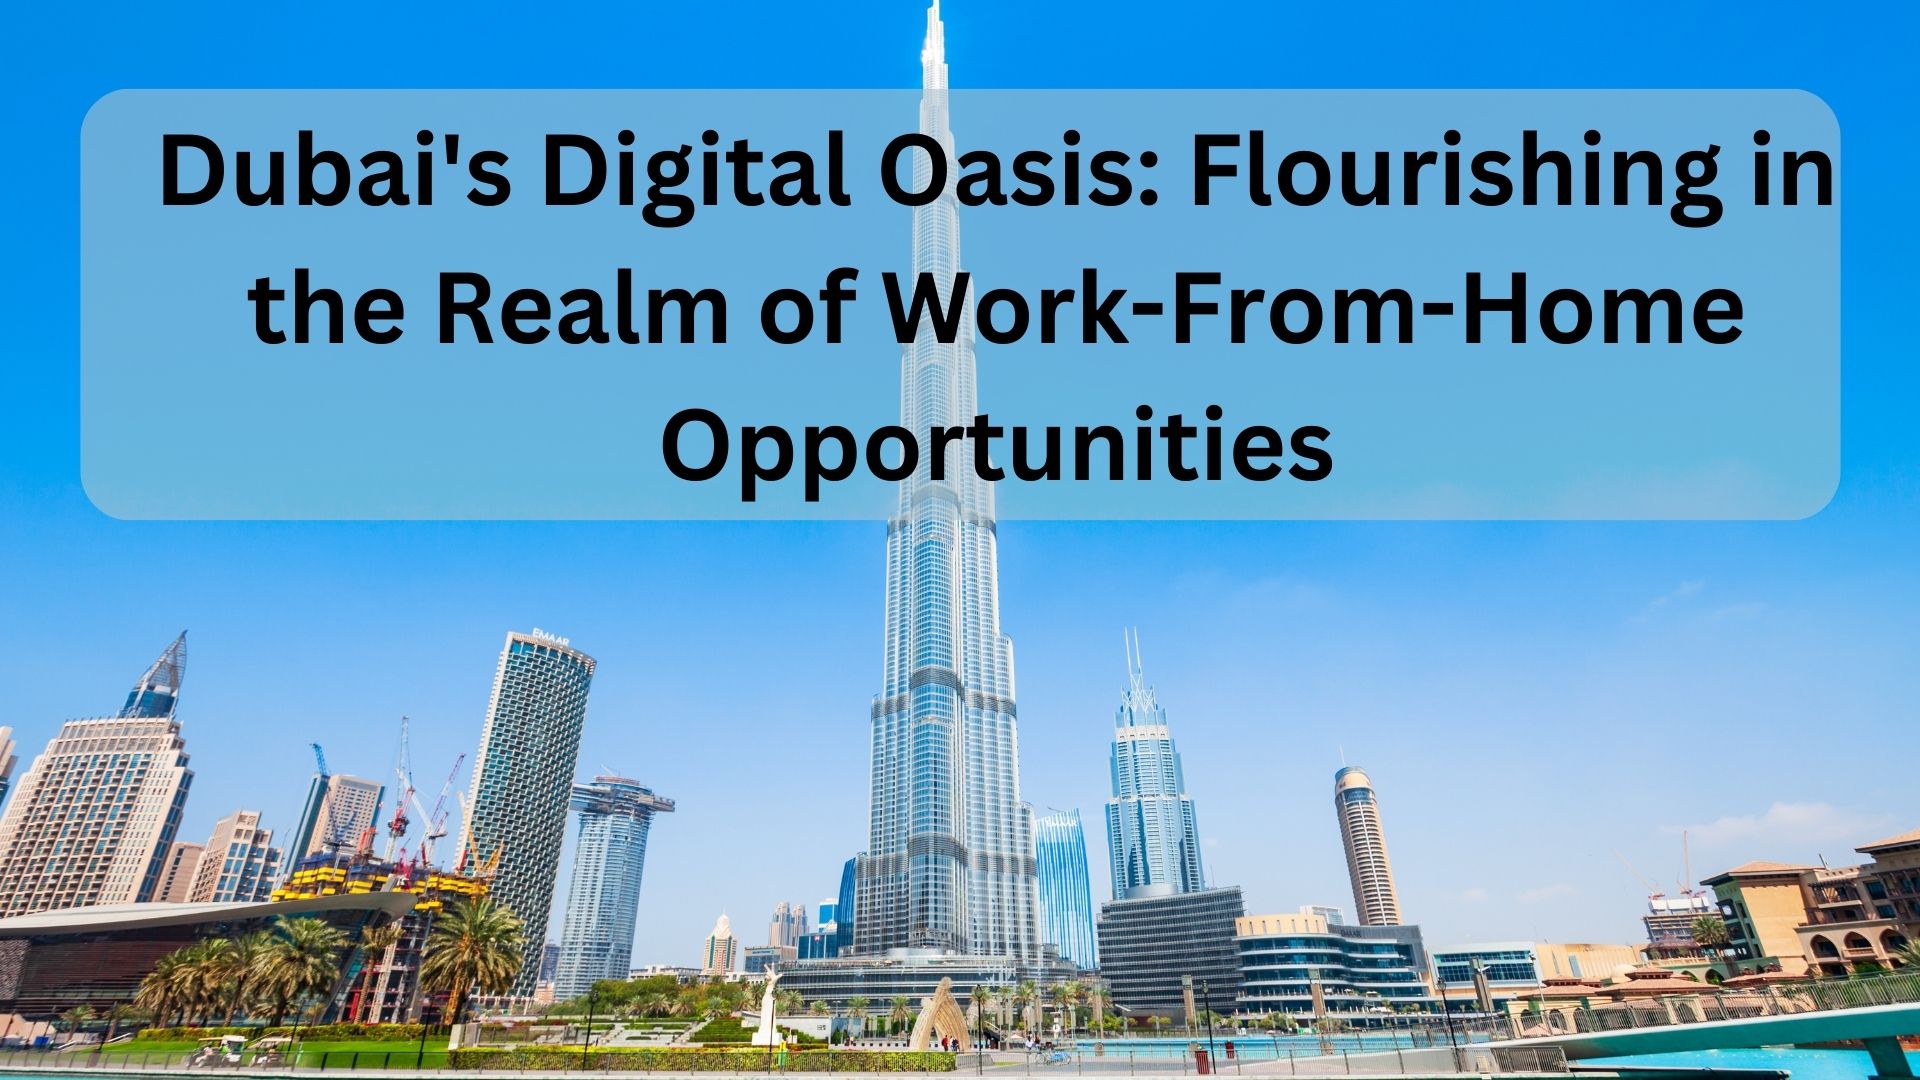 Dubai's Digital Oasis: Flourishing in the Realm of Work-From-Home Opportunities